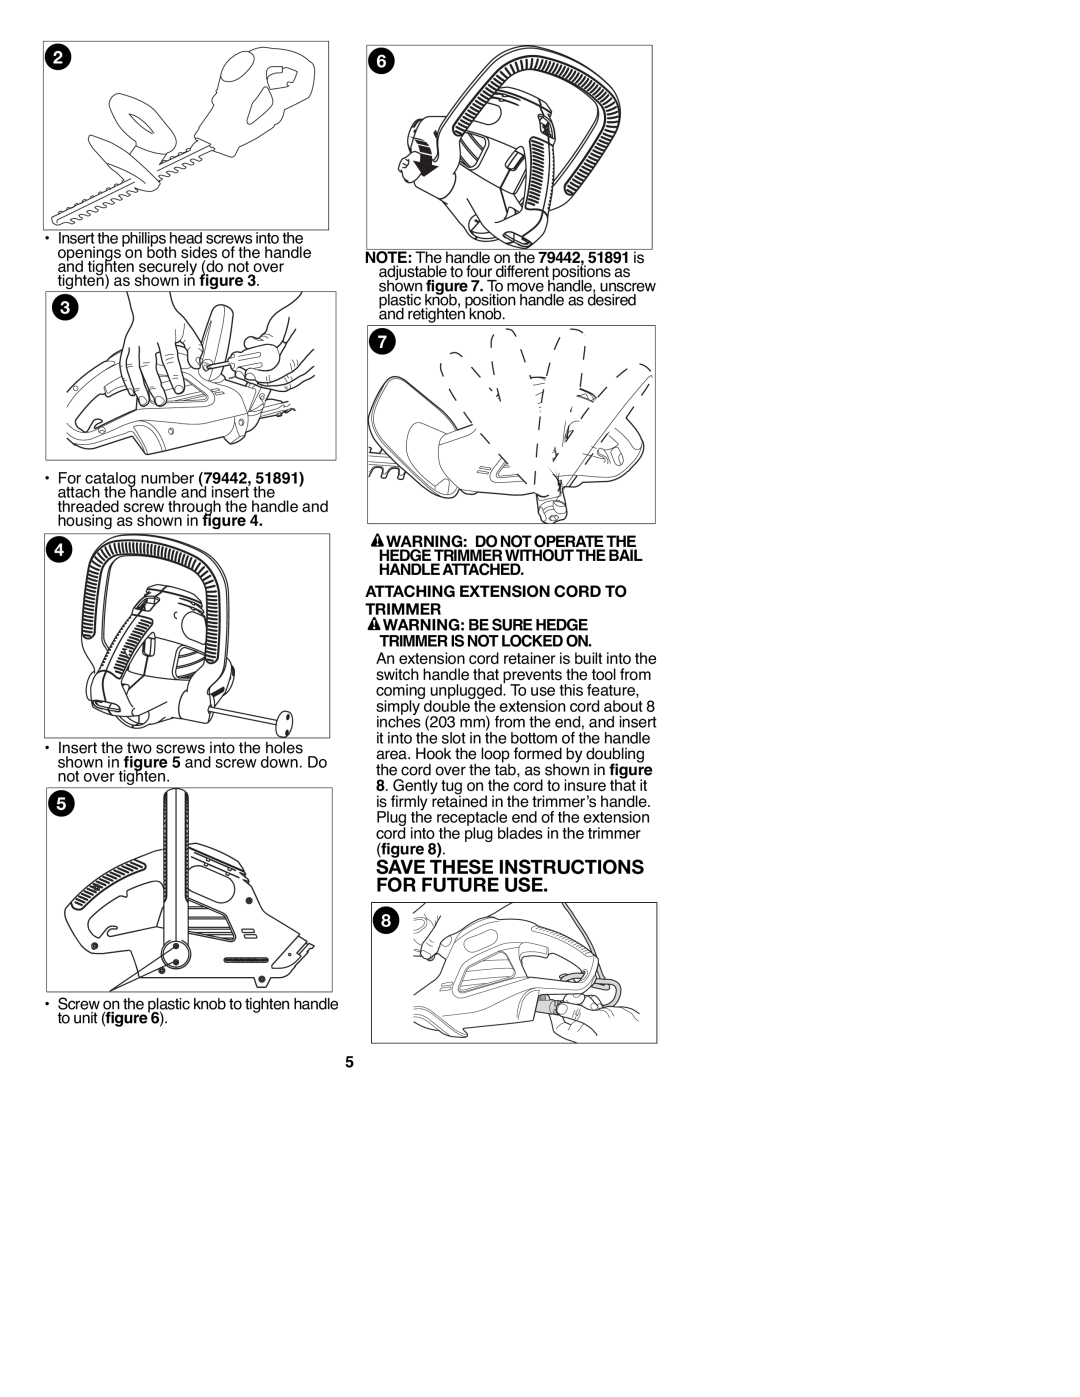 Craftsman 900 operating instructions Attaching Extension Cord To Trimmer, Save These Instructions For Future Use 